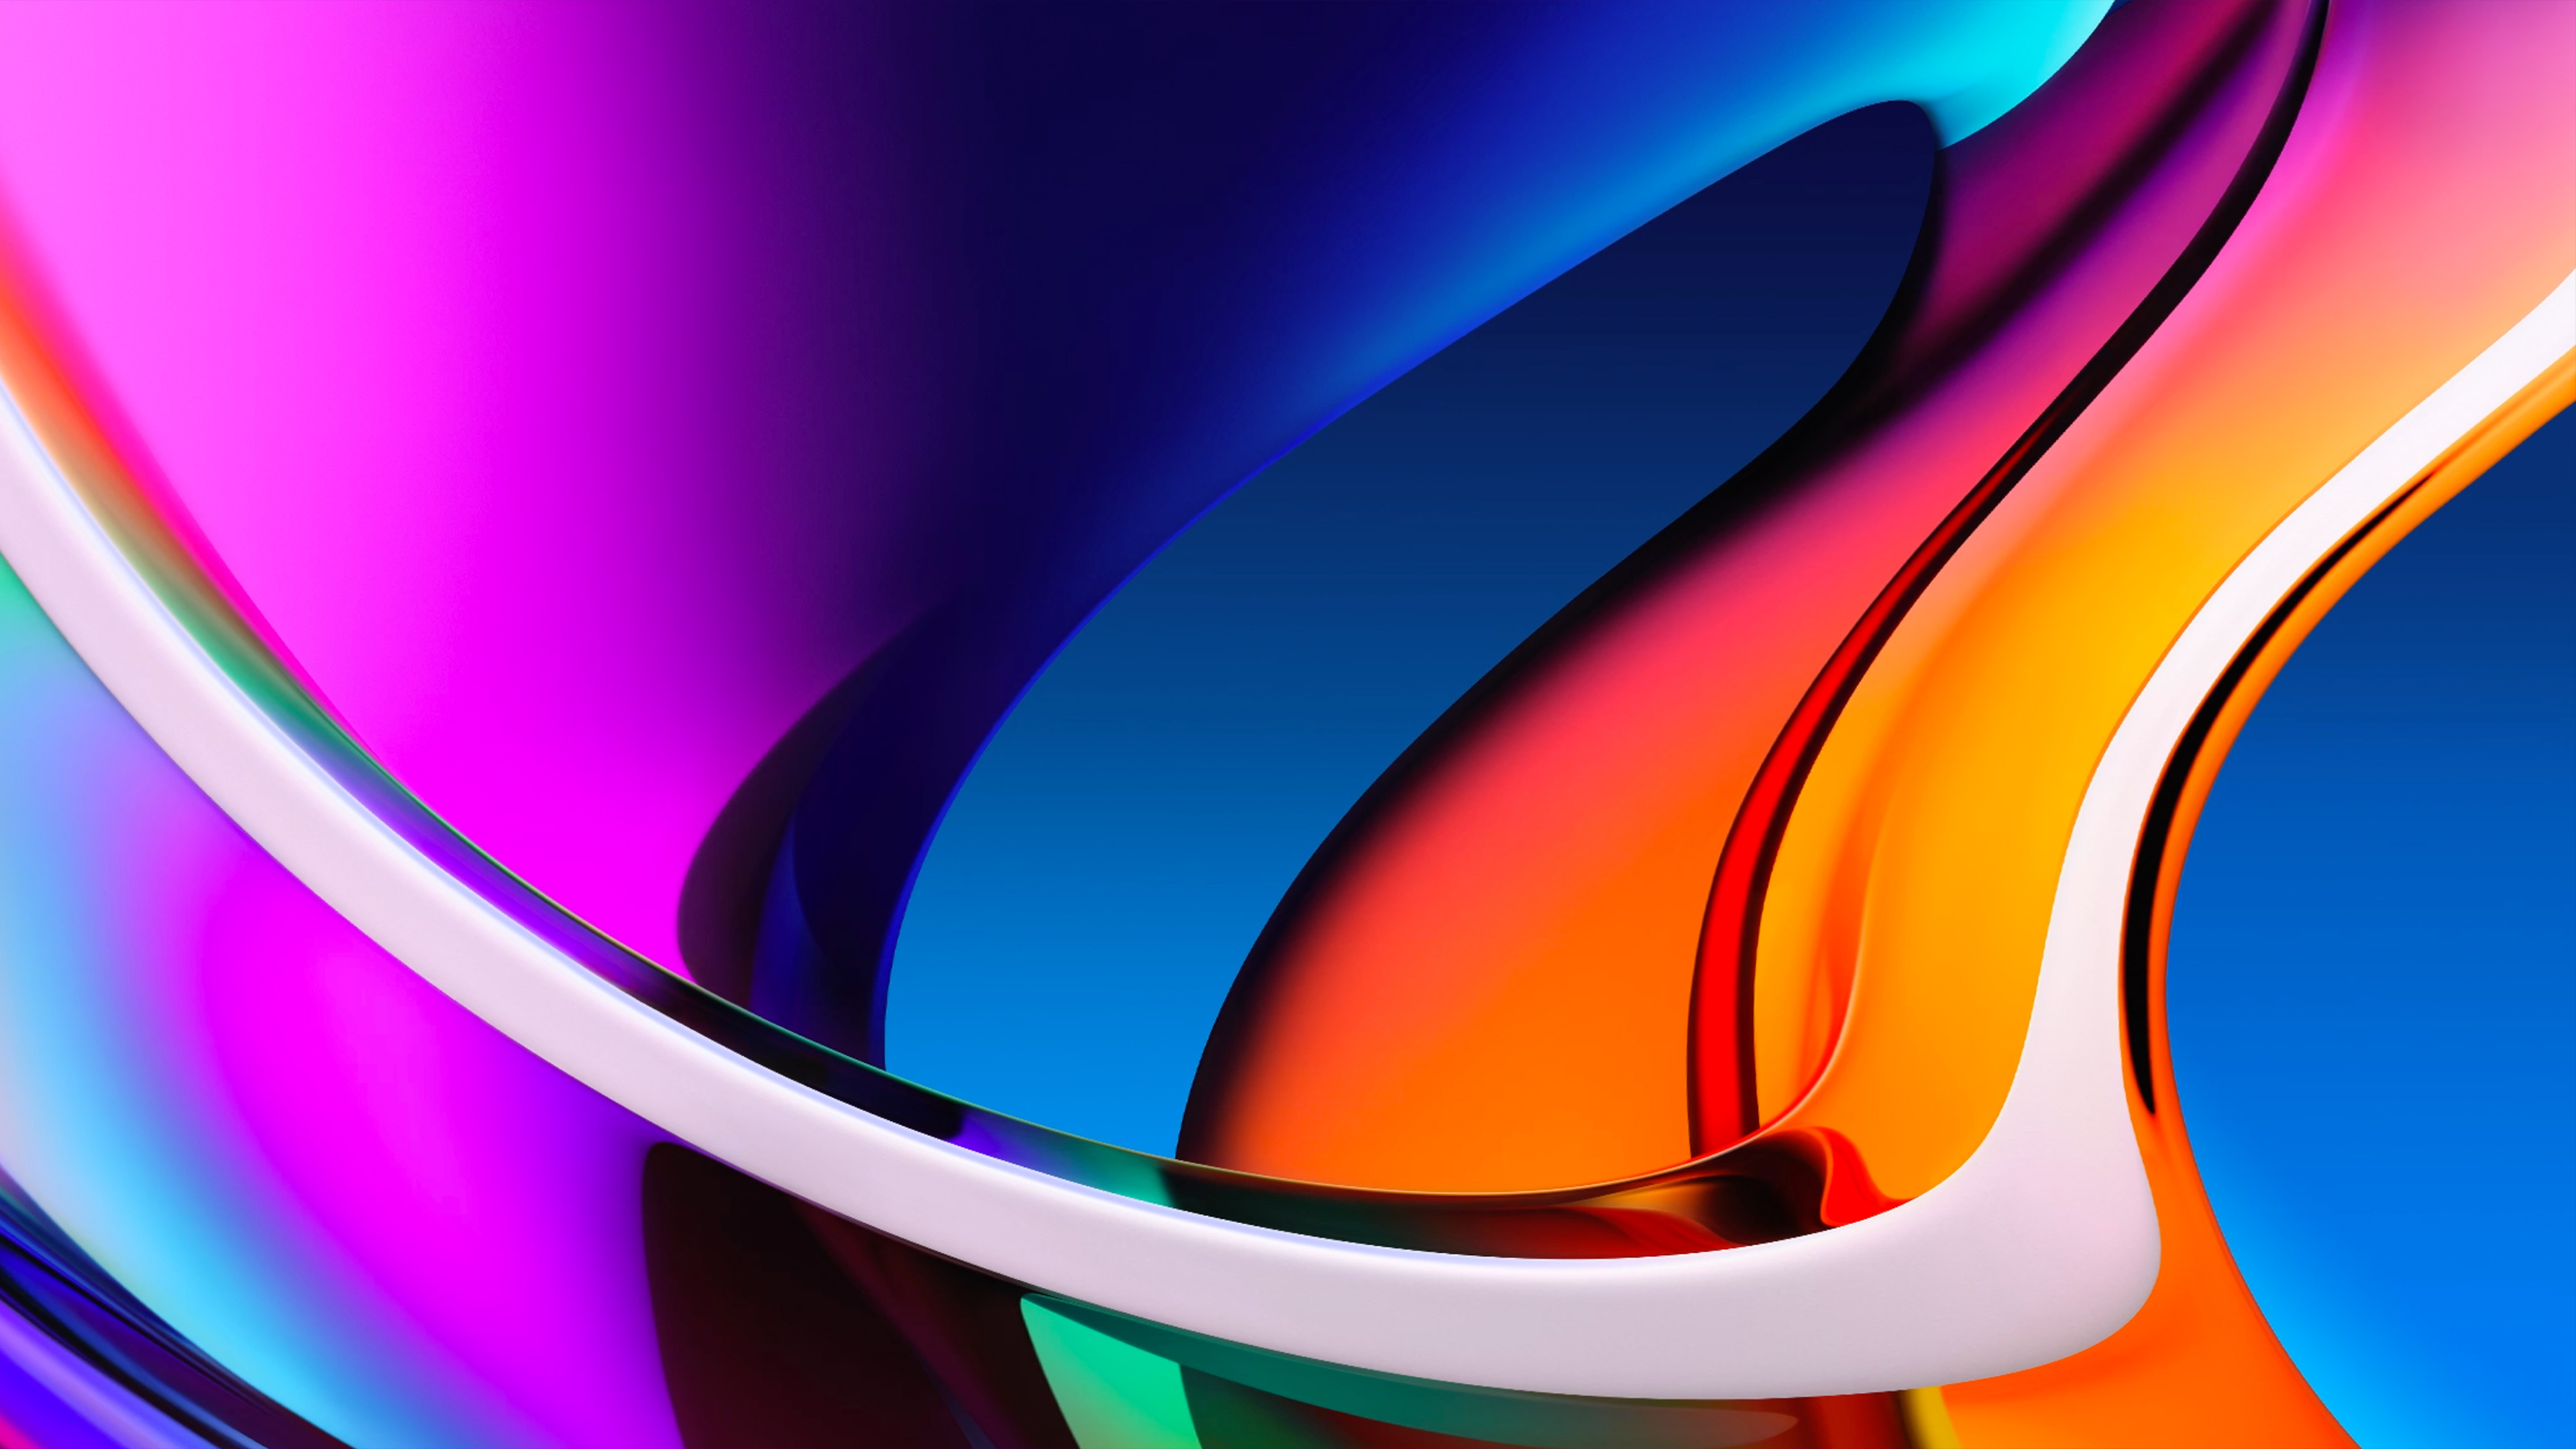 Wallpaper 4k Abstract Colorful Glass Bend Shapes 4k 4k Wallpaper